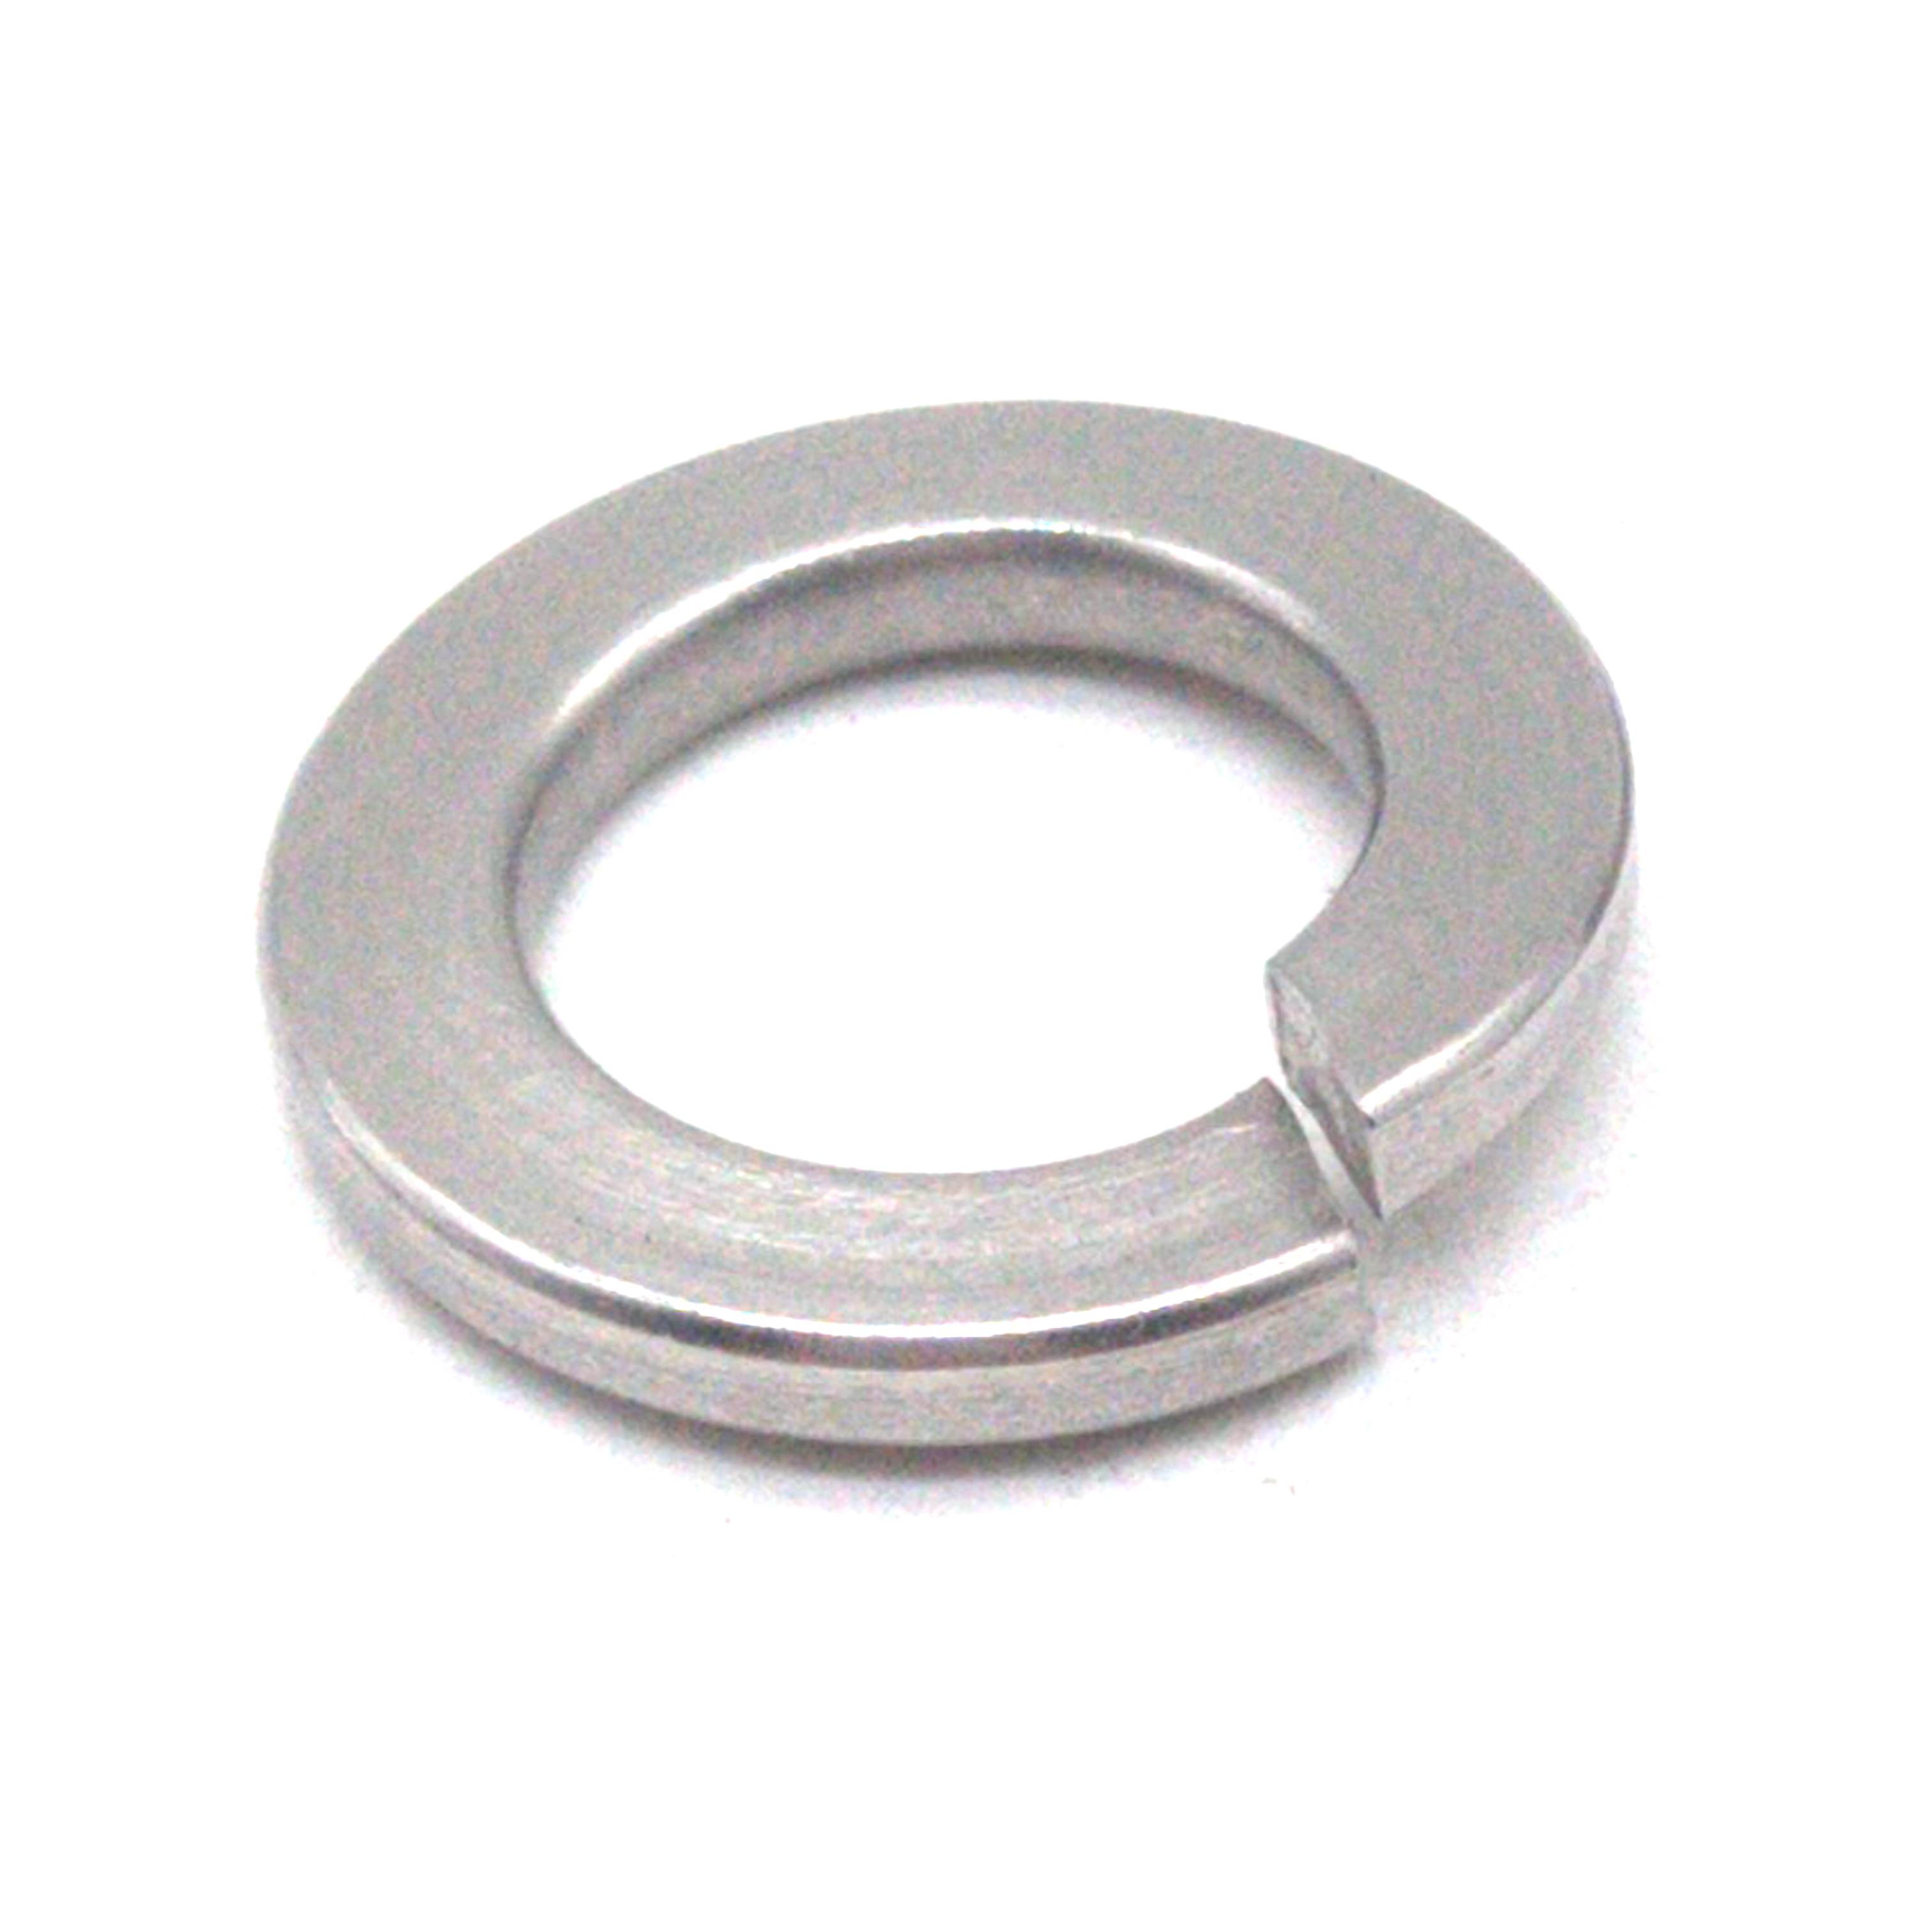 Ss304 Ss316 M6 M8 M12 M16 Stainless Steel Spring Washer Buy M20 Stainless Steel Washers